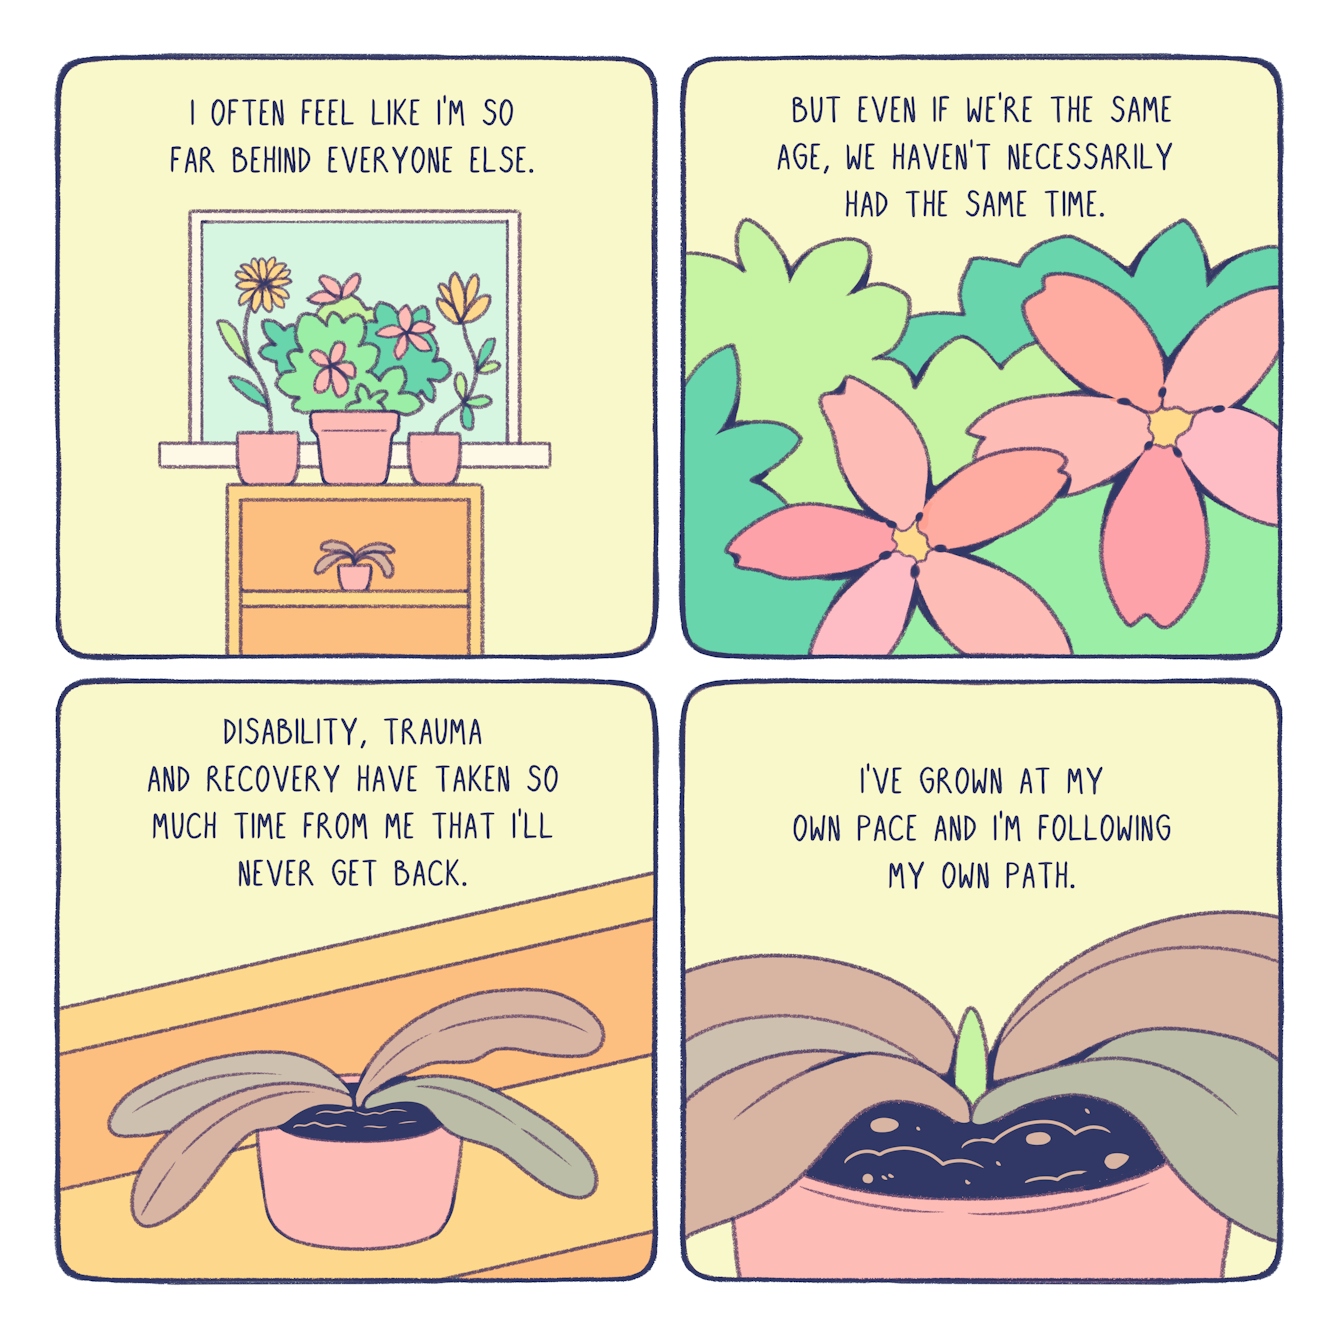 A short, four panel comic about personal growth.

In the first panel, an assortment of beautiful plants sit atop a yellow shelf in front of a window. Beneath them on the bottom shelf, a browning plant wilts from the lack of sunlight. The text reads, "I often feel like I'm so far behind everyone else."

In the second panel, we see a close-up of a beautiful green bush with pink flowers growing out of it. The text reads, "but even if we're the same age, we haven't necessarily had the same time."

In the third panel, we see the wilted plant on the bottom shelf. The text reads, "disability, trauma and recovery have taken so much time from me that I'll never get back."

In the final panel, we zoom in more closely on the wilting plant to see that the bright green shoot of a new leaf is peaking up from the centre of the plant. The text reads, "I've grown at my own pace and I'm following my own path."